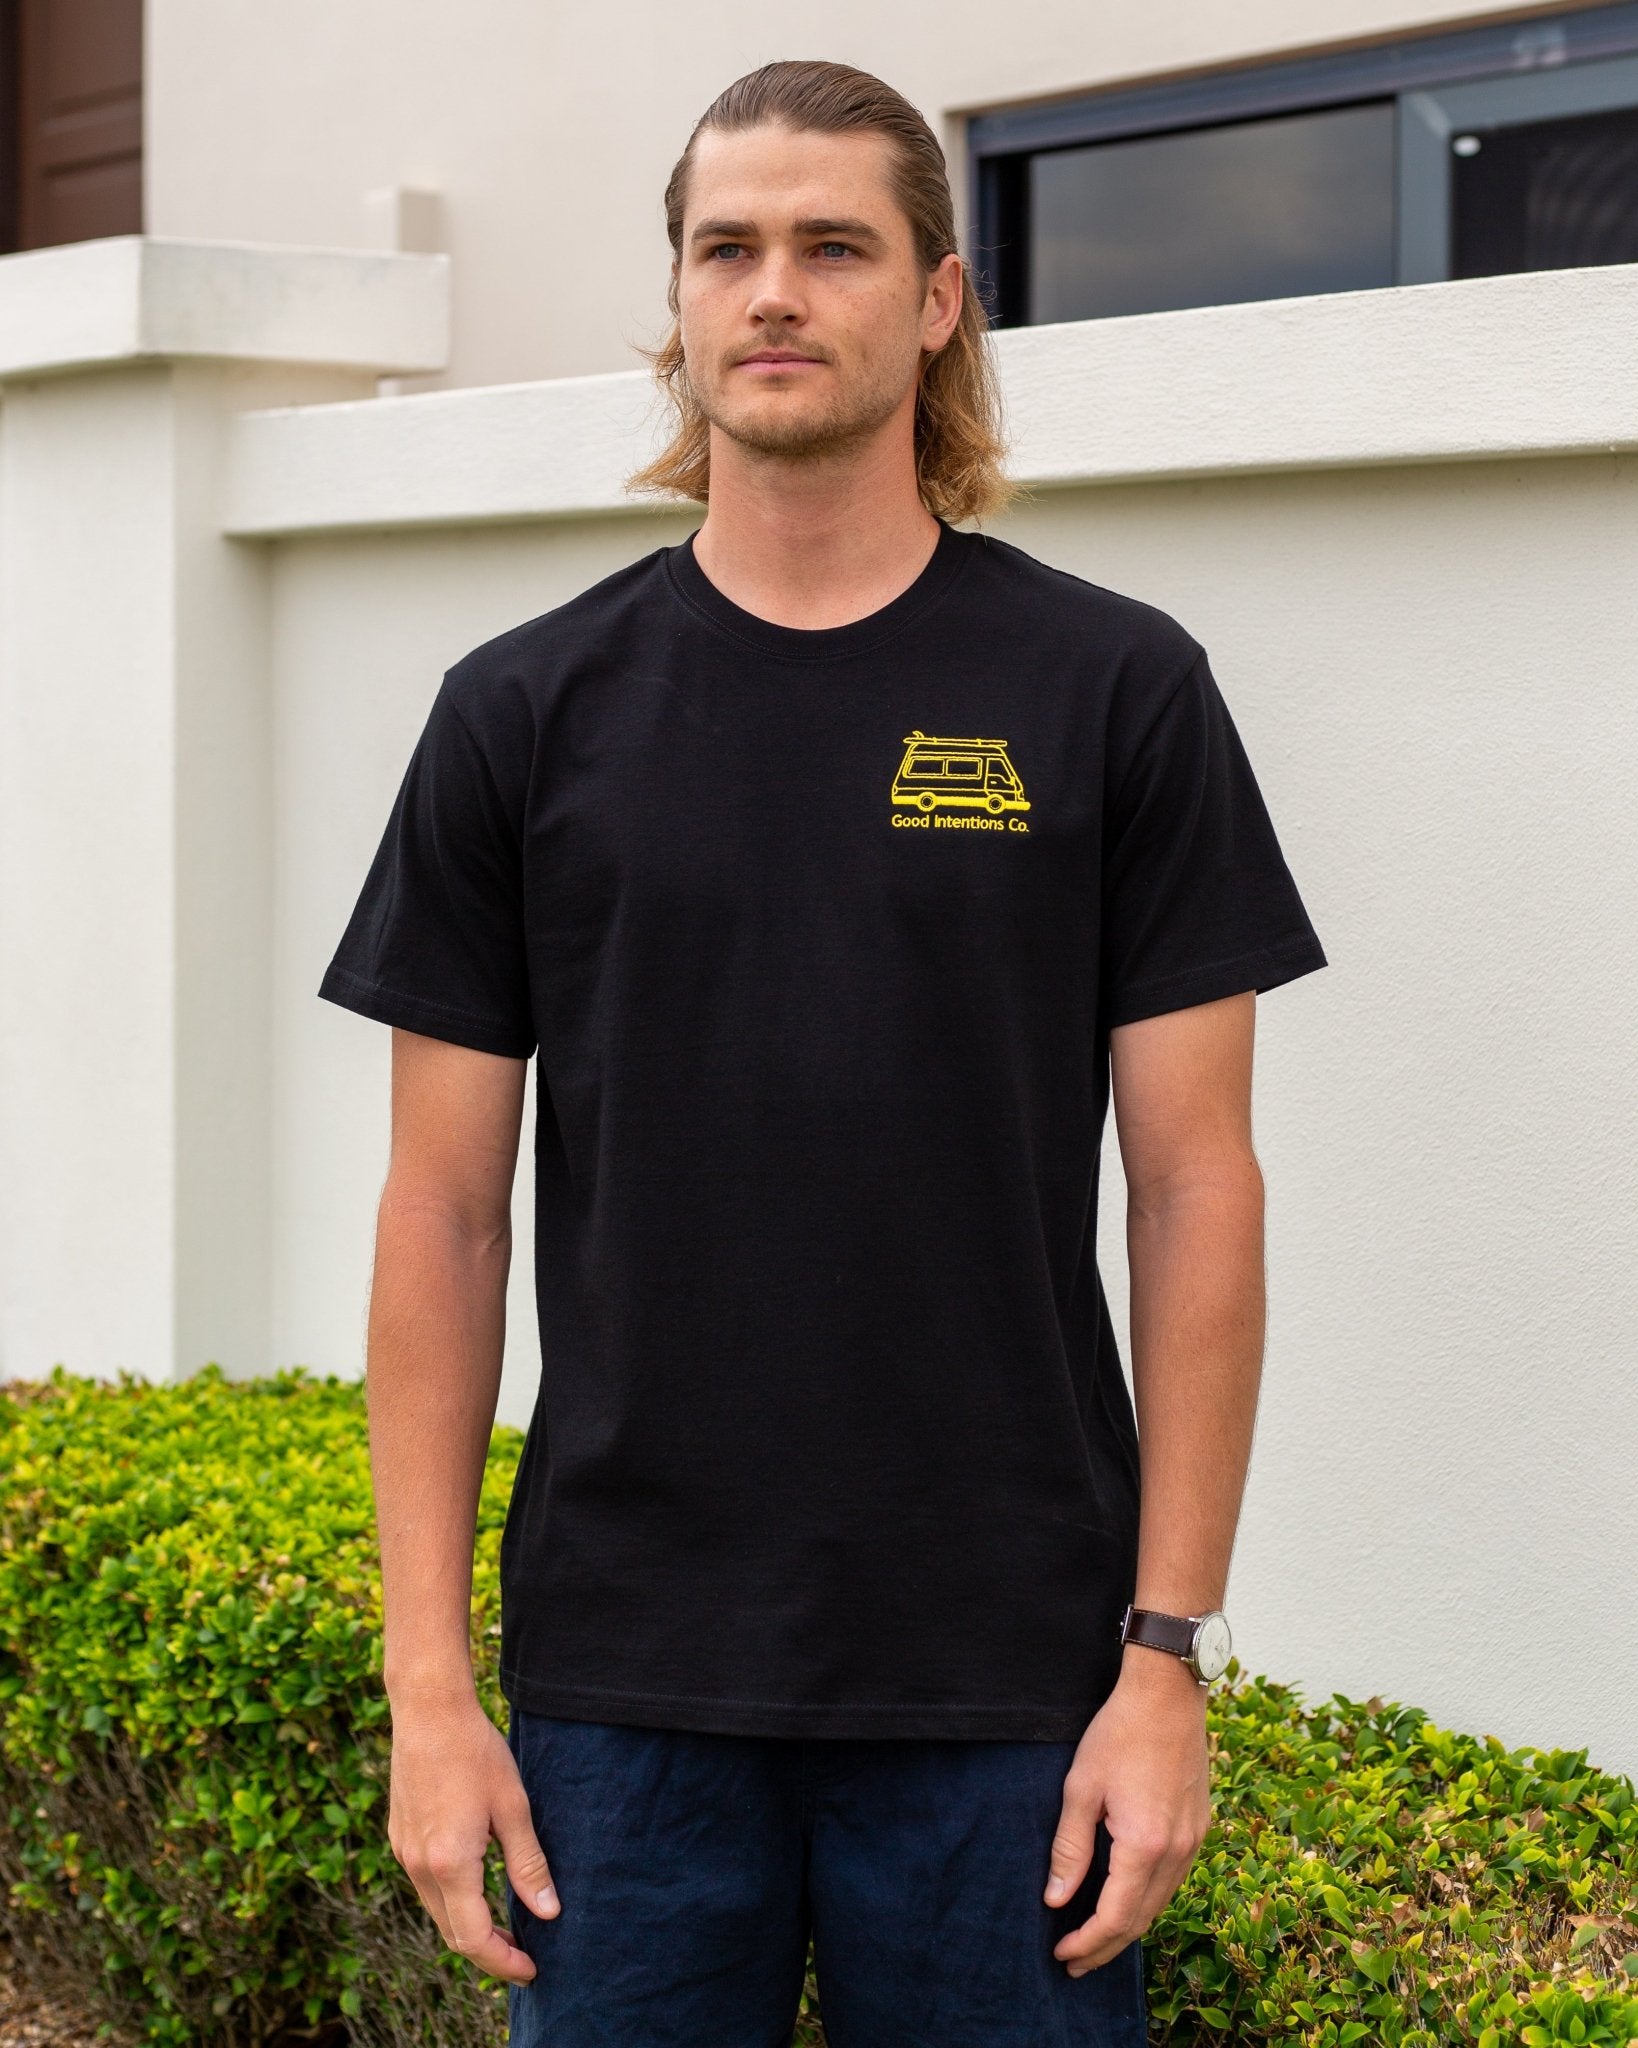 Black tshirt with yellow embroidered design 